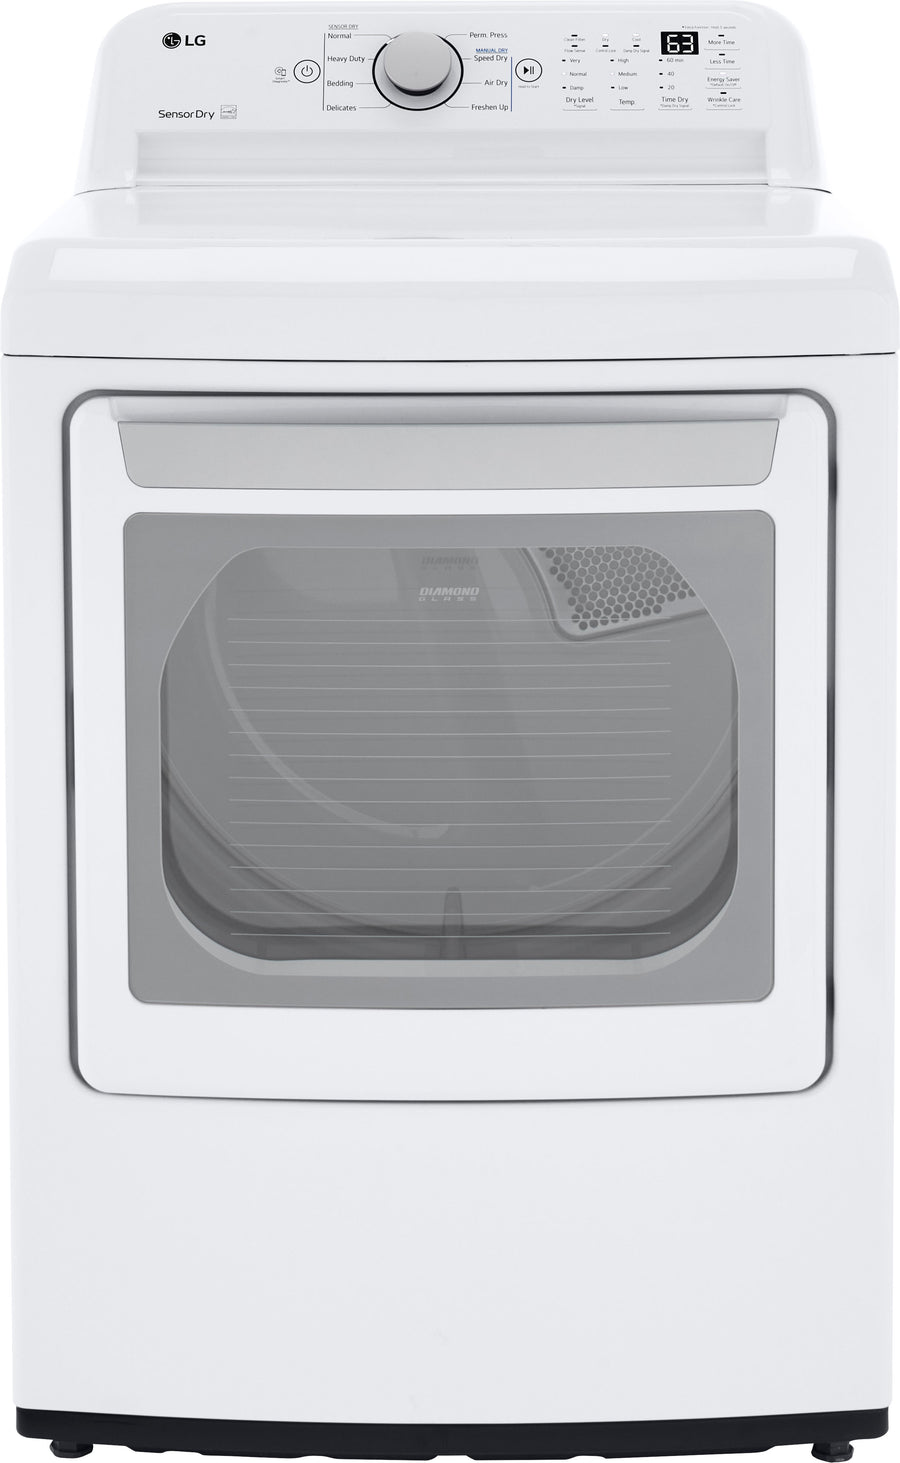 LG - 7.3 Cu Ft Electric Dryer with Sensor Dry - White_0